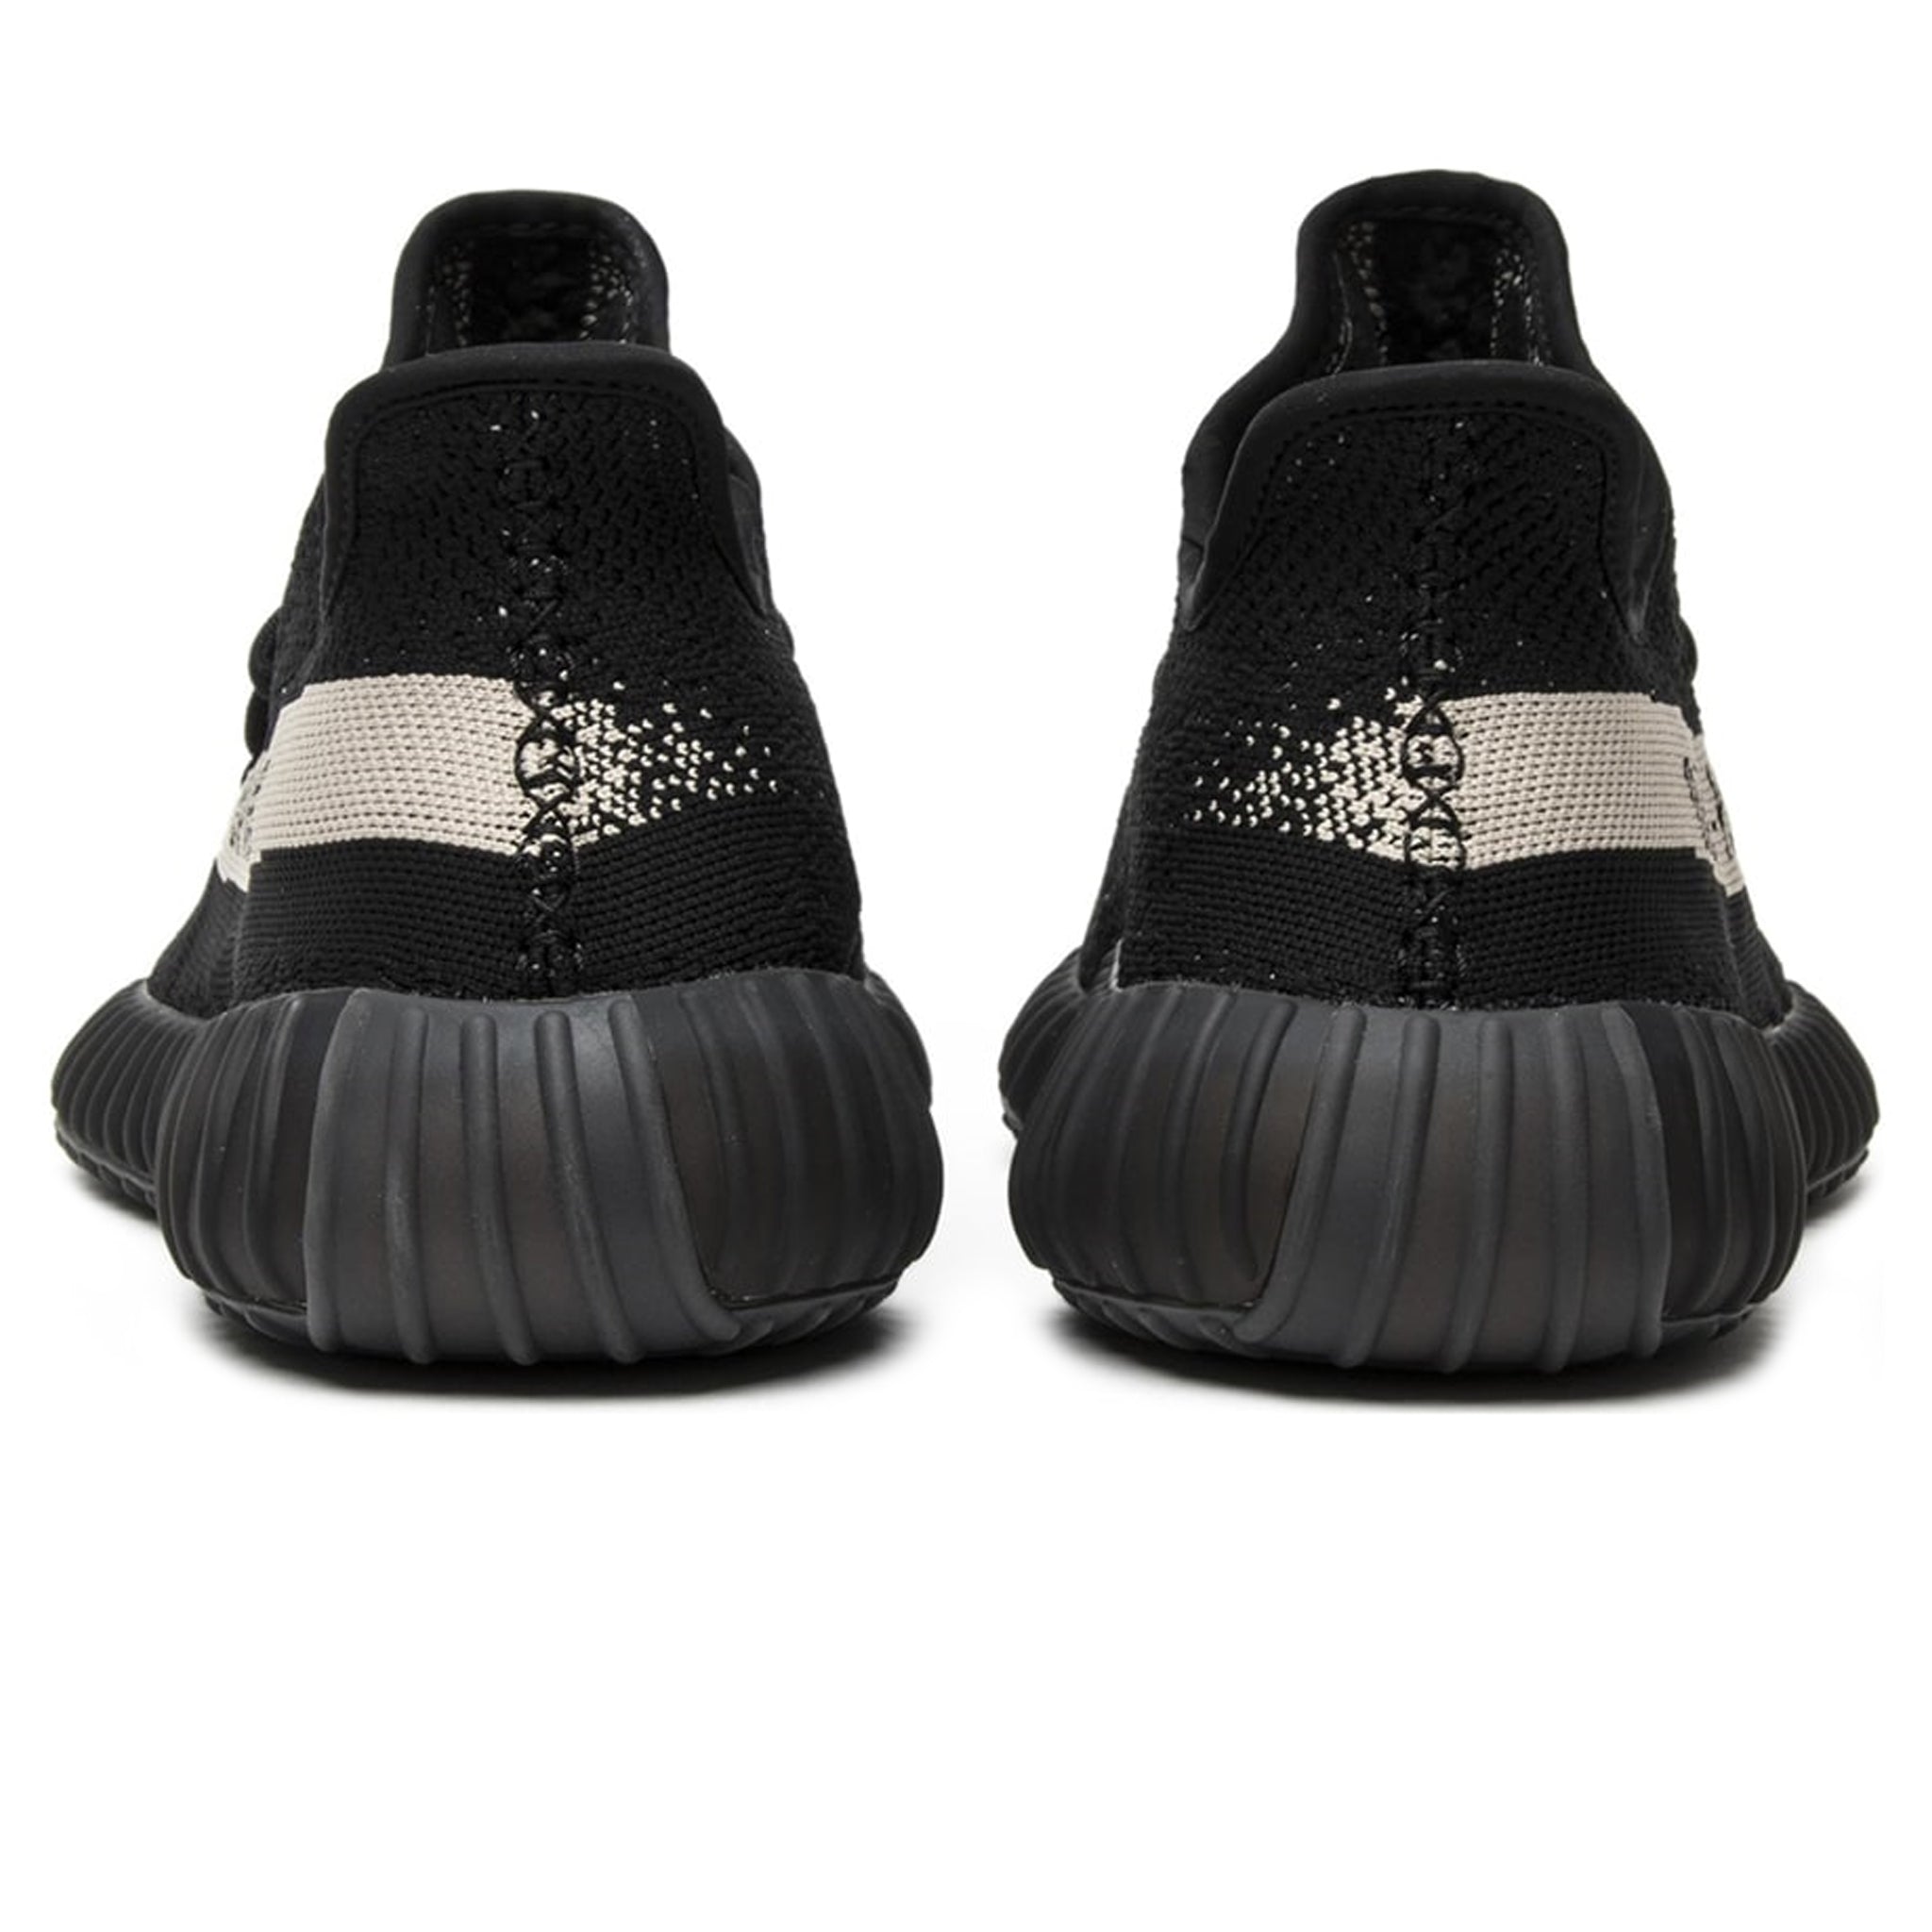 Heel view of Adidas Yeezy Boost 350 V2 Core Black White (Oreo) BY1604